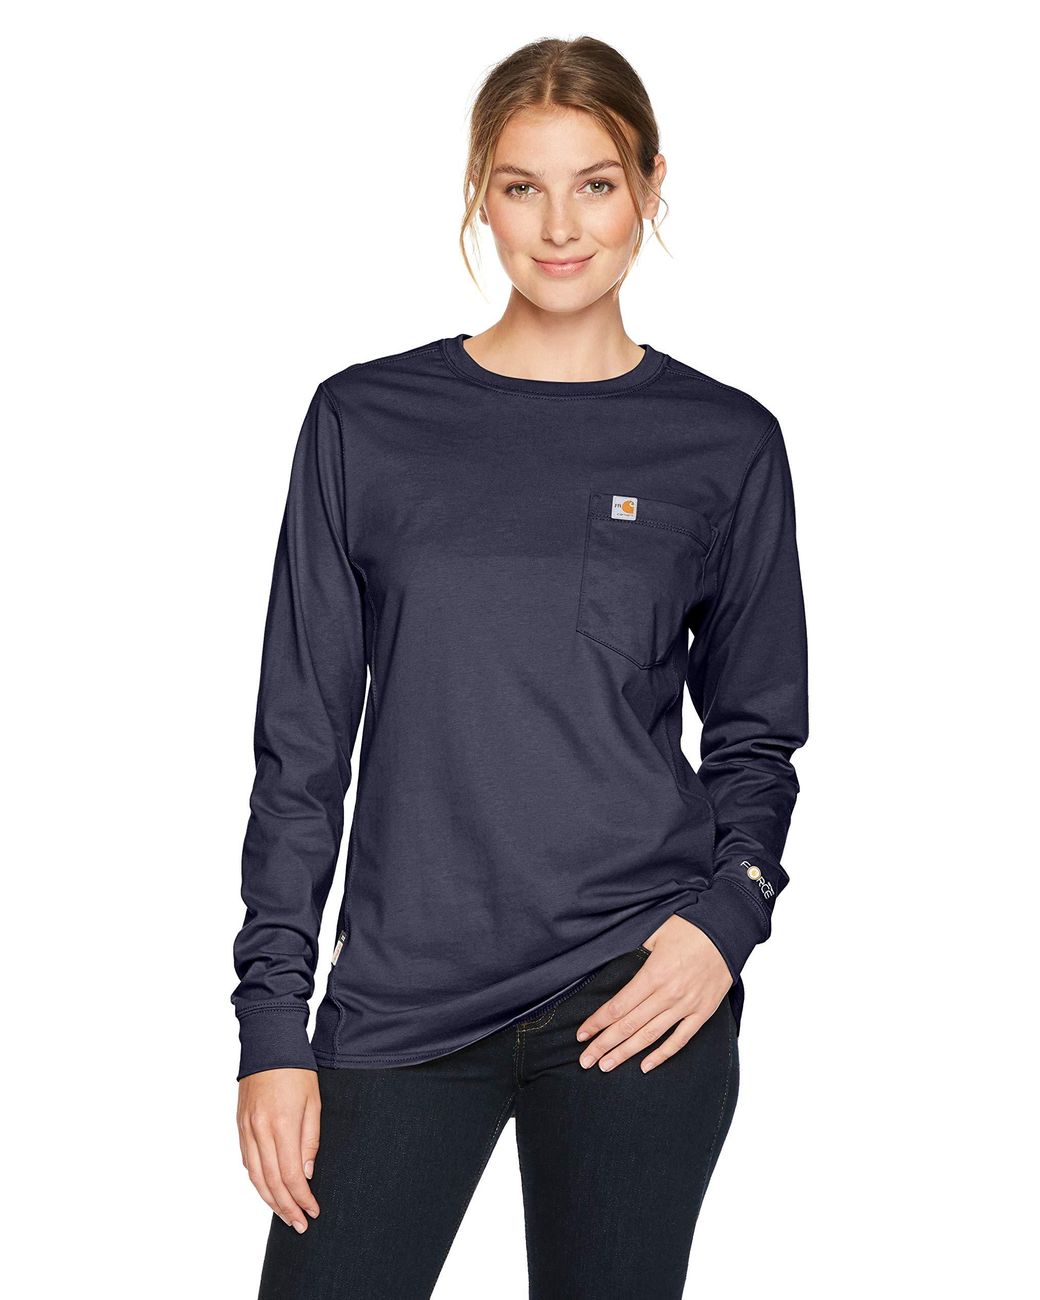 Carhartt Flame Resistant S Force Cotton Long Sleeve Crew T Shirt in ...